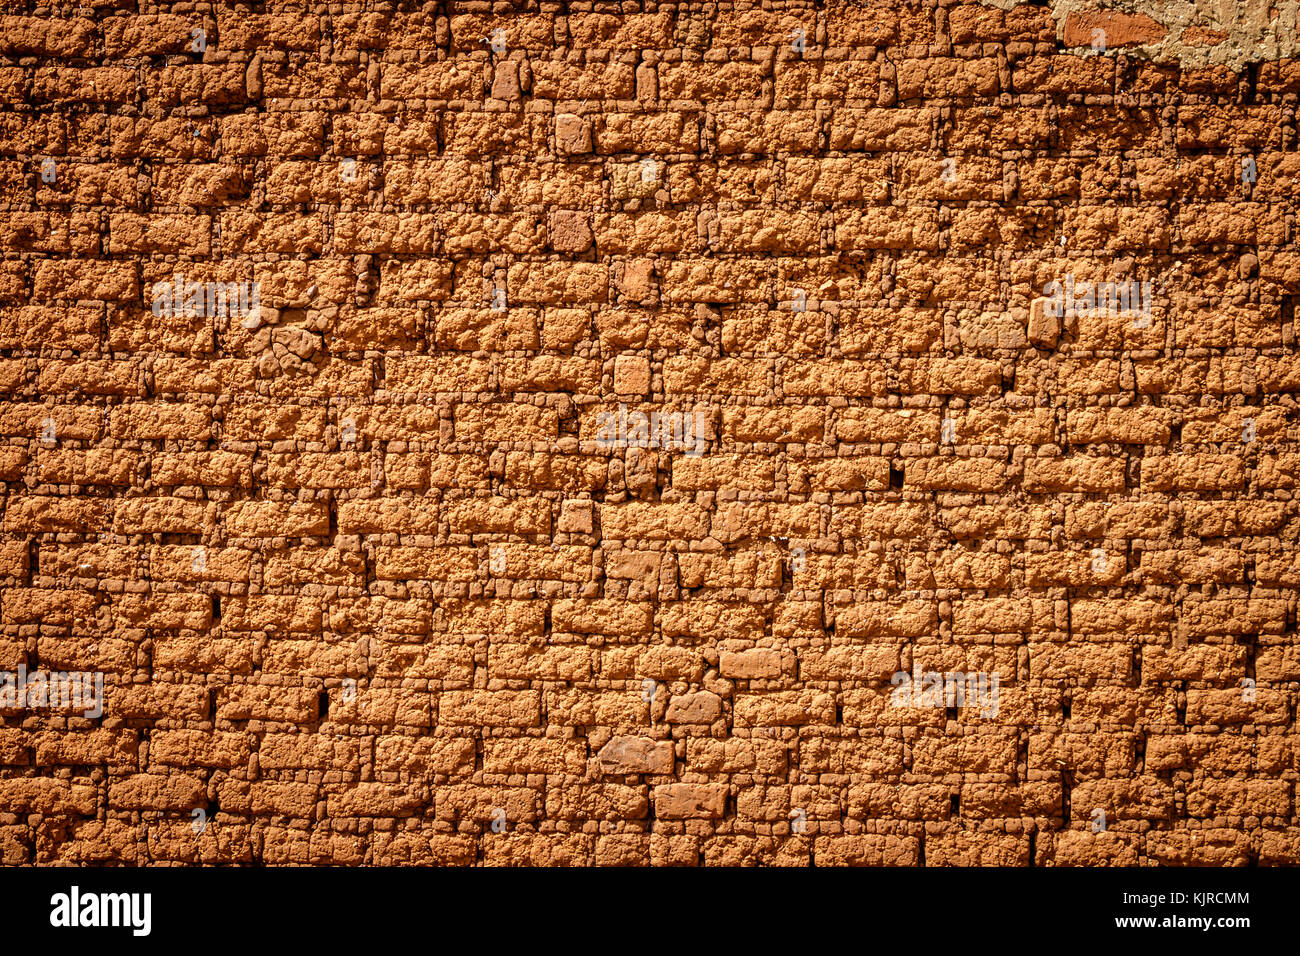 A typical mud brick wall of a house in Uganda. A brick is building material used to make walls, pavements and other elements in masonry construction. Stock Photo